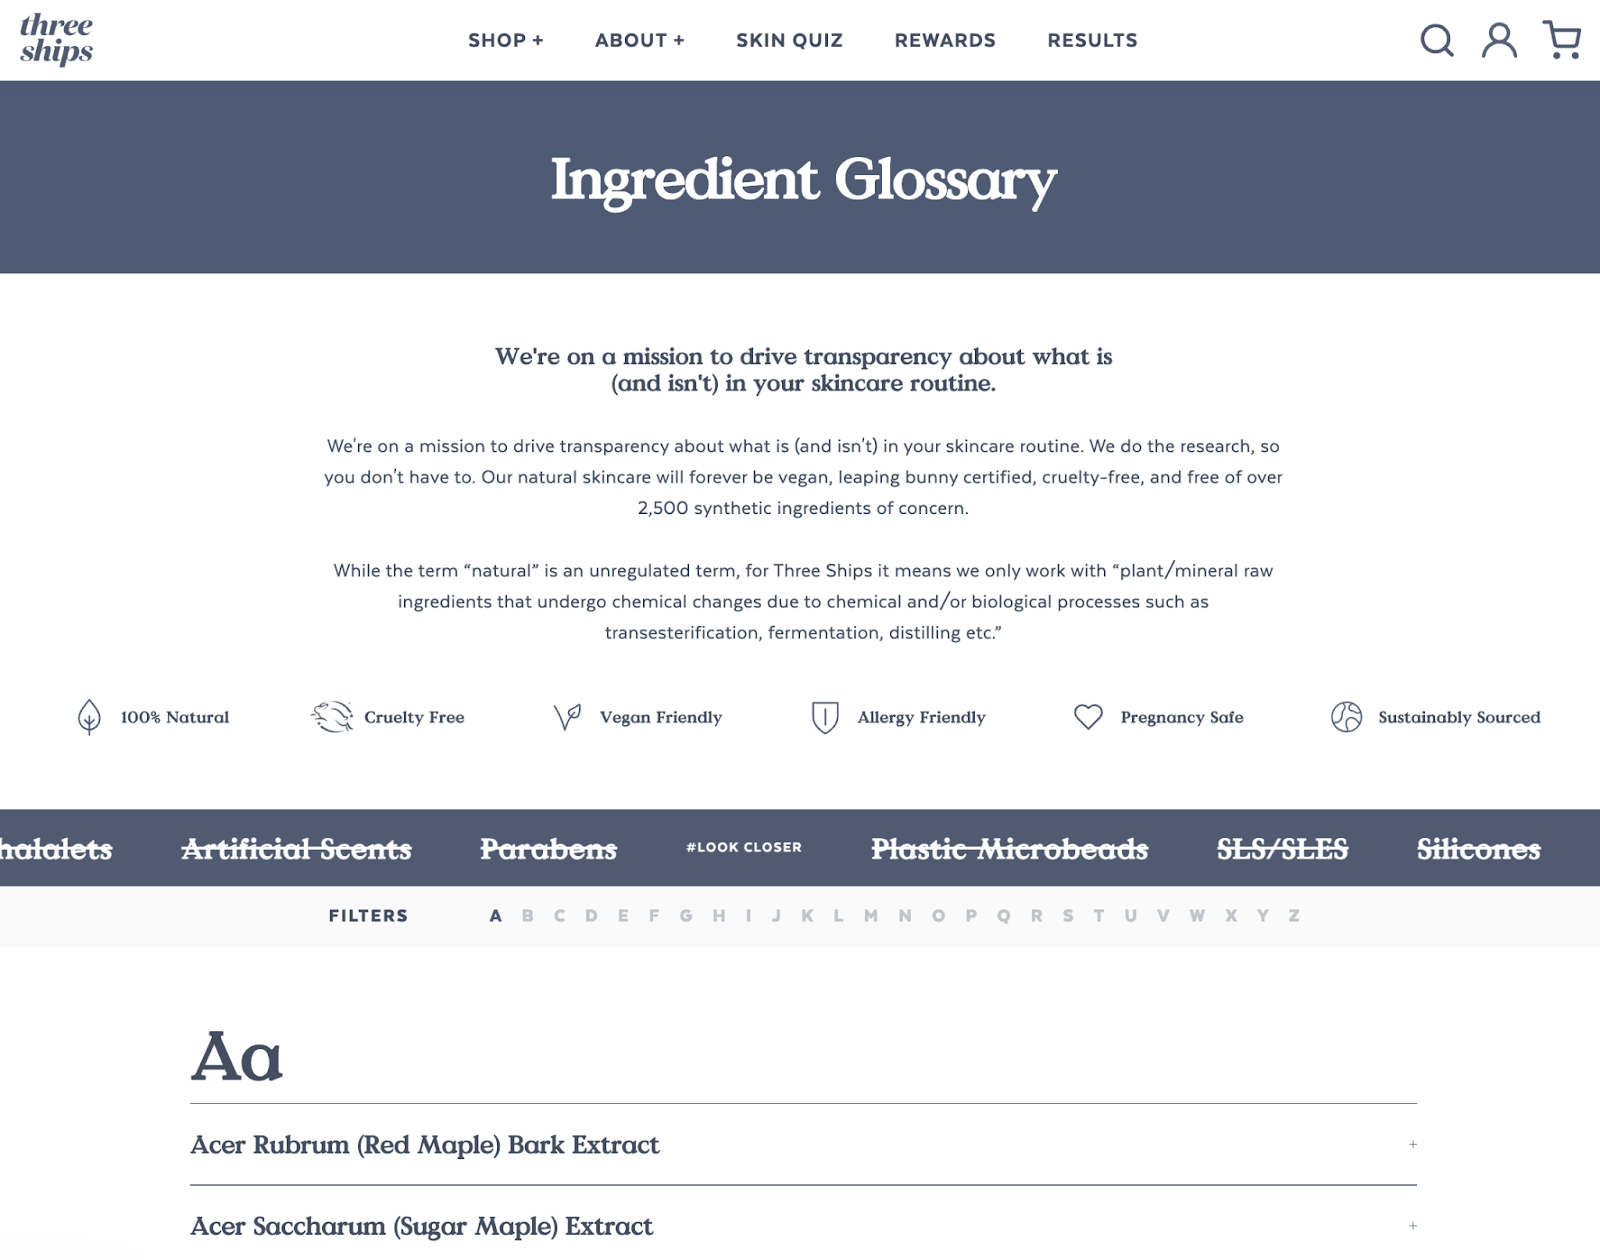 Three Ships’ Ingredient Glossary webpage, with information about the brand’s mission and values.